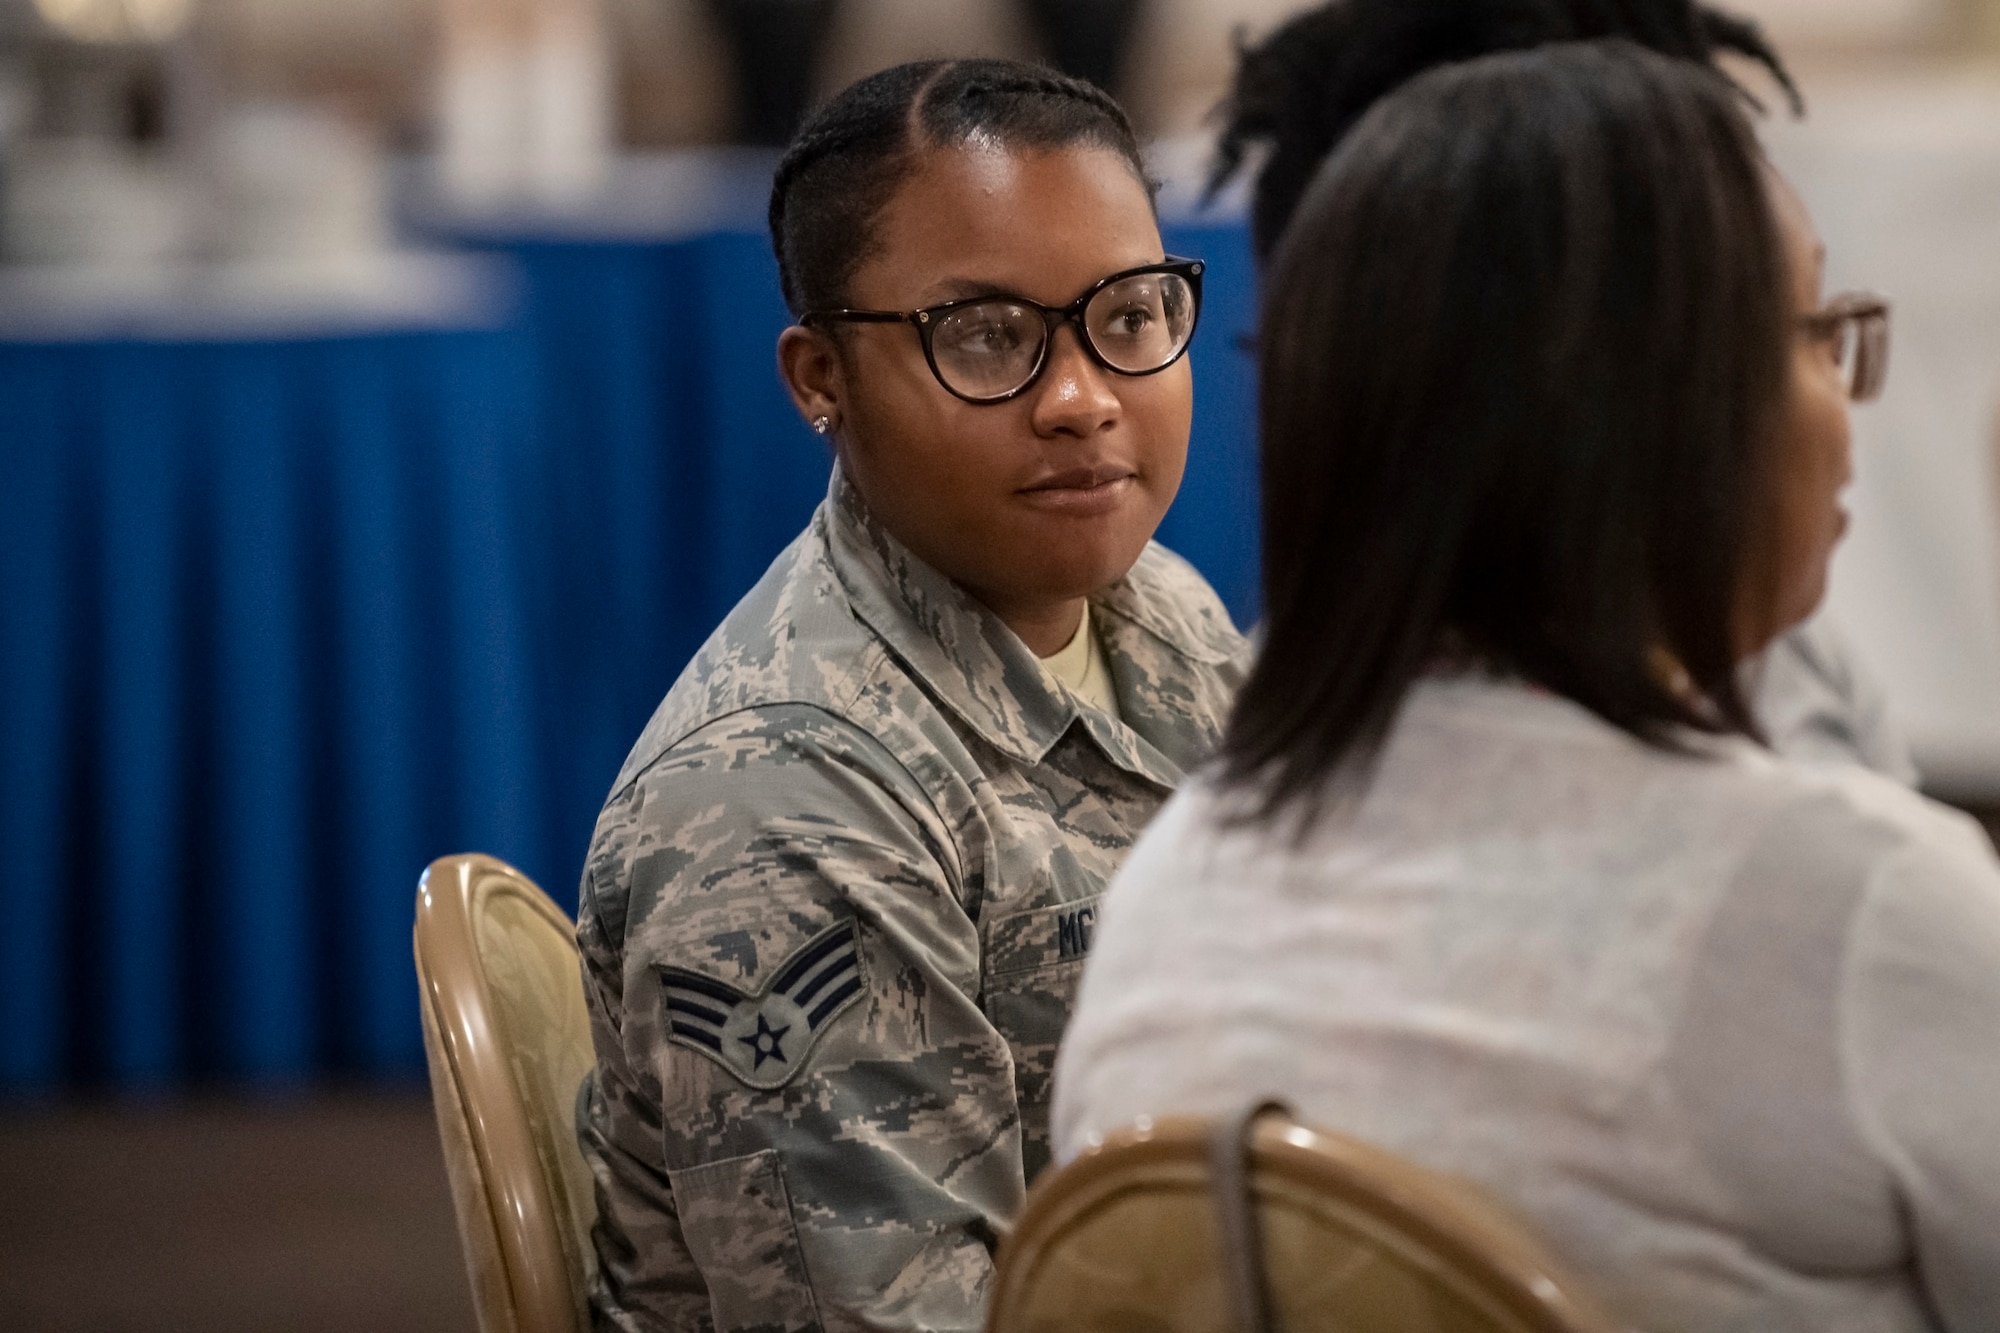 U.S. Air Force Senior Airman Diamond McNutt, a material management specialist assigned to the 307th Logistics and Readiness Squadron, listens to a speaker at the Shreveport Bossier Military Affairs Council quarterly update luncheon at Barksdale Air Force Base, Louisiana, June 12, 2019. McNutt earned a $1,000 scholarship from the MAC, which she will use to earn a bachelor's degree in biology. (U.S. Air Force photo by Senior Airman Maxwell Daigle)